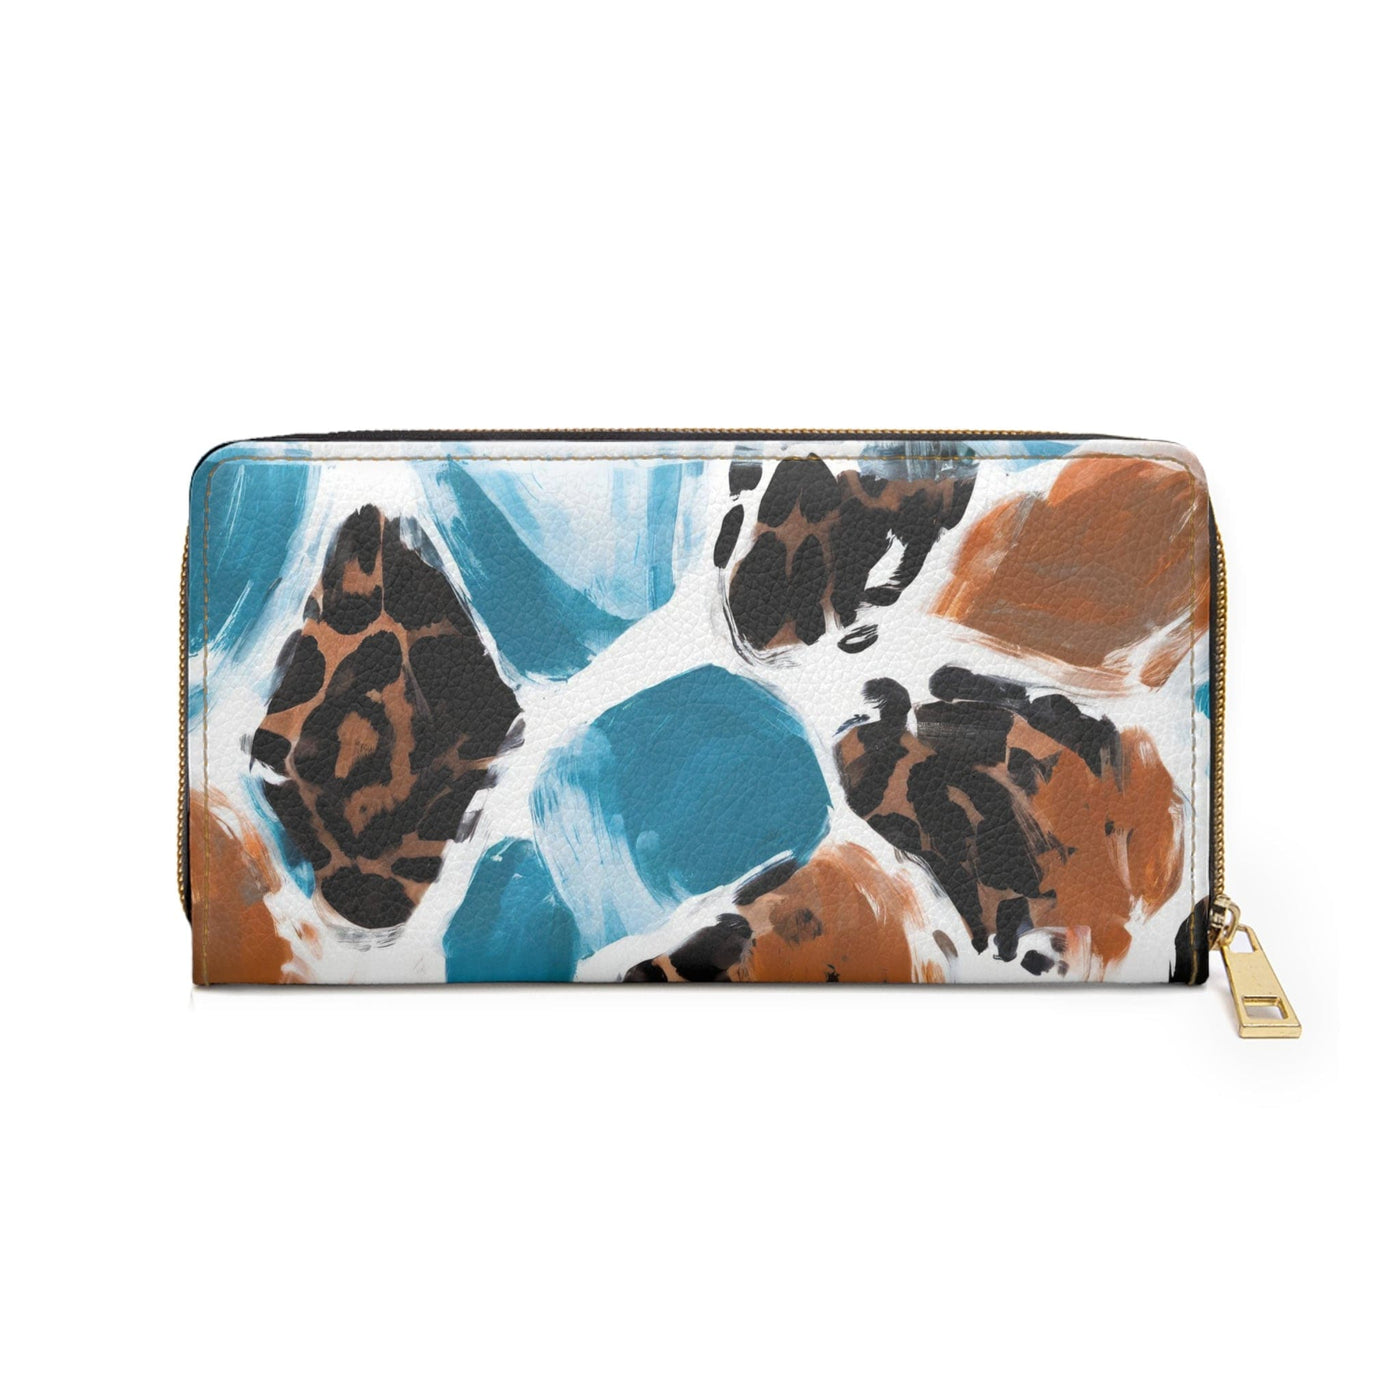 Zipper Wallet Light Blue And Brown Spotted Pattern - Accessories